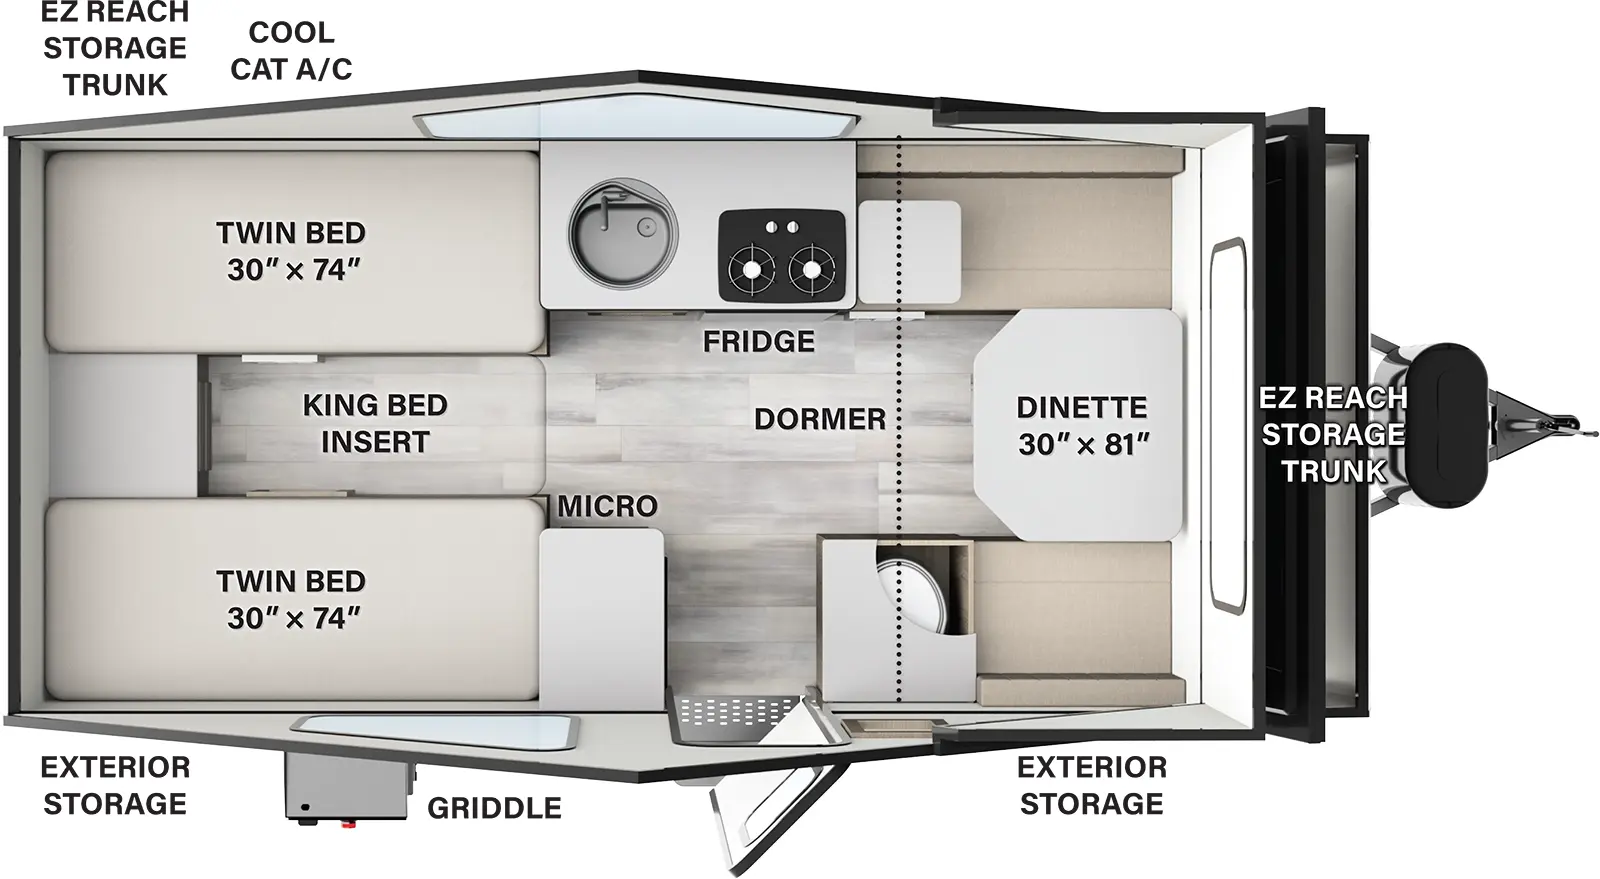 The A213HW has no slide outs and one entry door. Exterior features include a griddle on the door side, EZ reach storage trunk, Cool Cat A/C, and exterior storage. Interior layout from front to back: front dormer containing a dinette; mid area has a door side toilet, entry door and cabinet with microwave, and off-door side kitchen area with a refrigerator, sink, and cooktop; rear twin beds with a king bed insert.